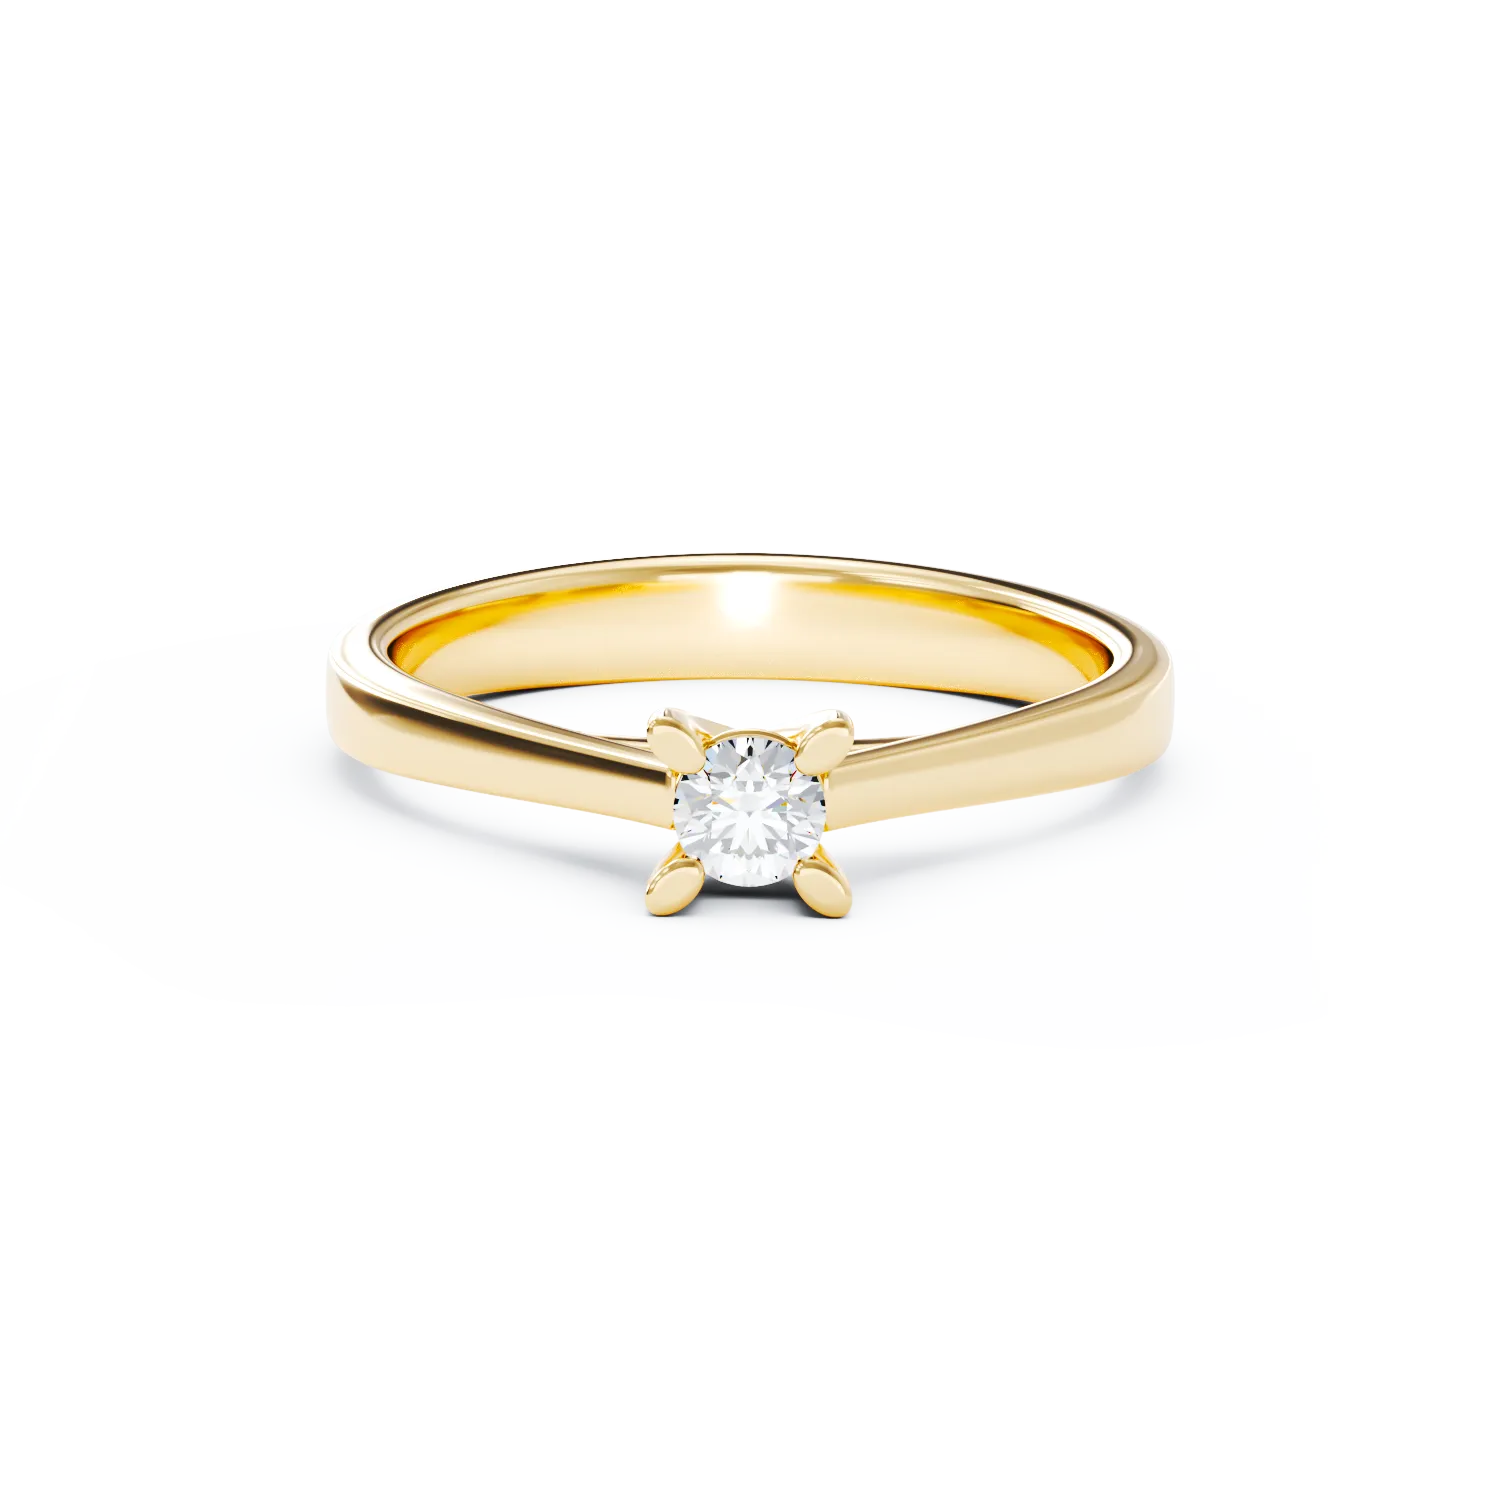 18K yellow gold engagement ring with a 0.15ct solitaire diamond